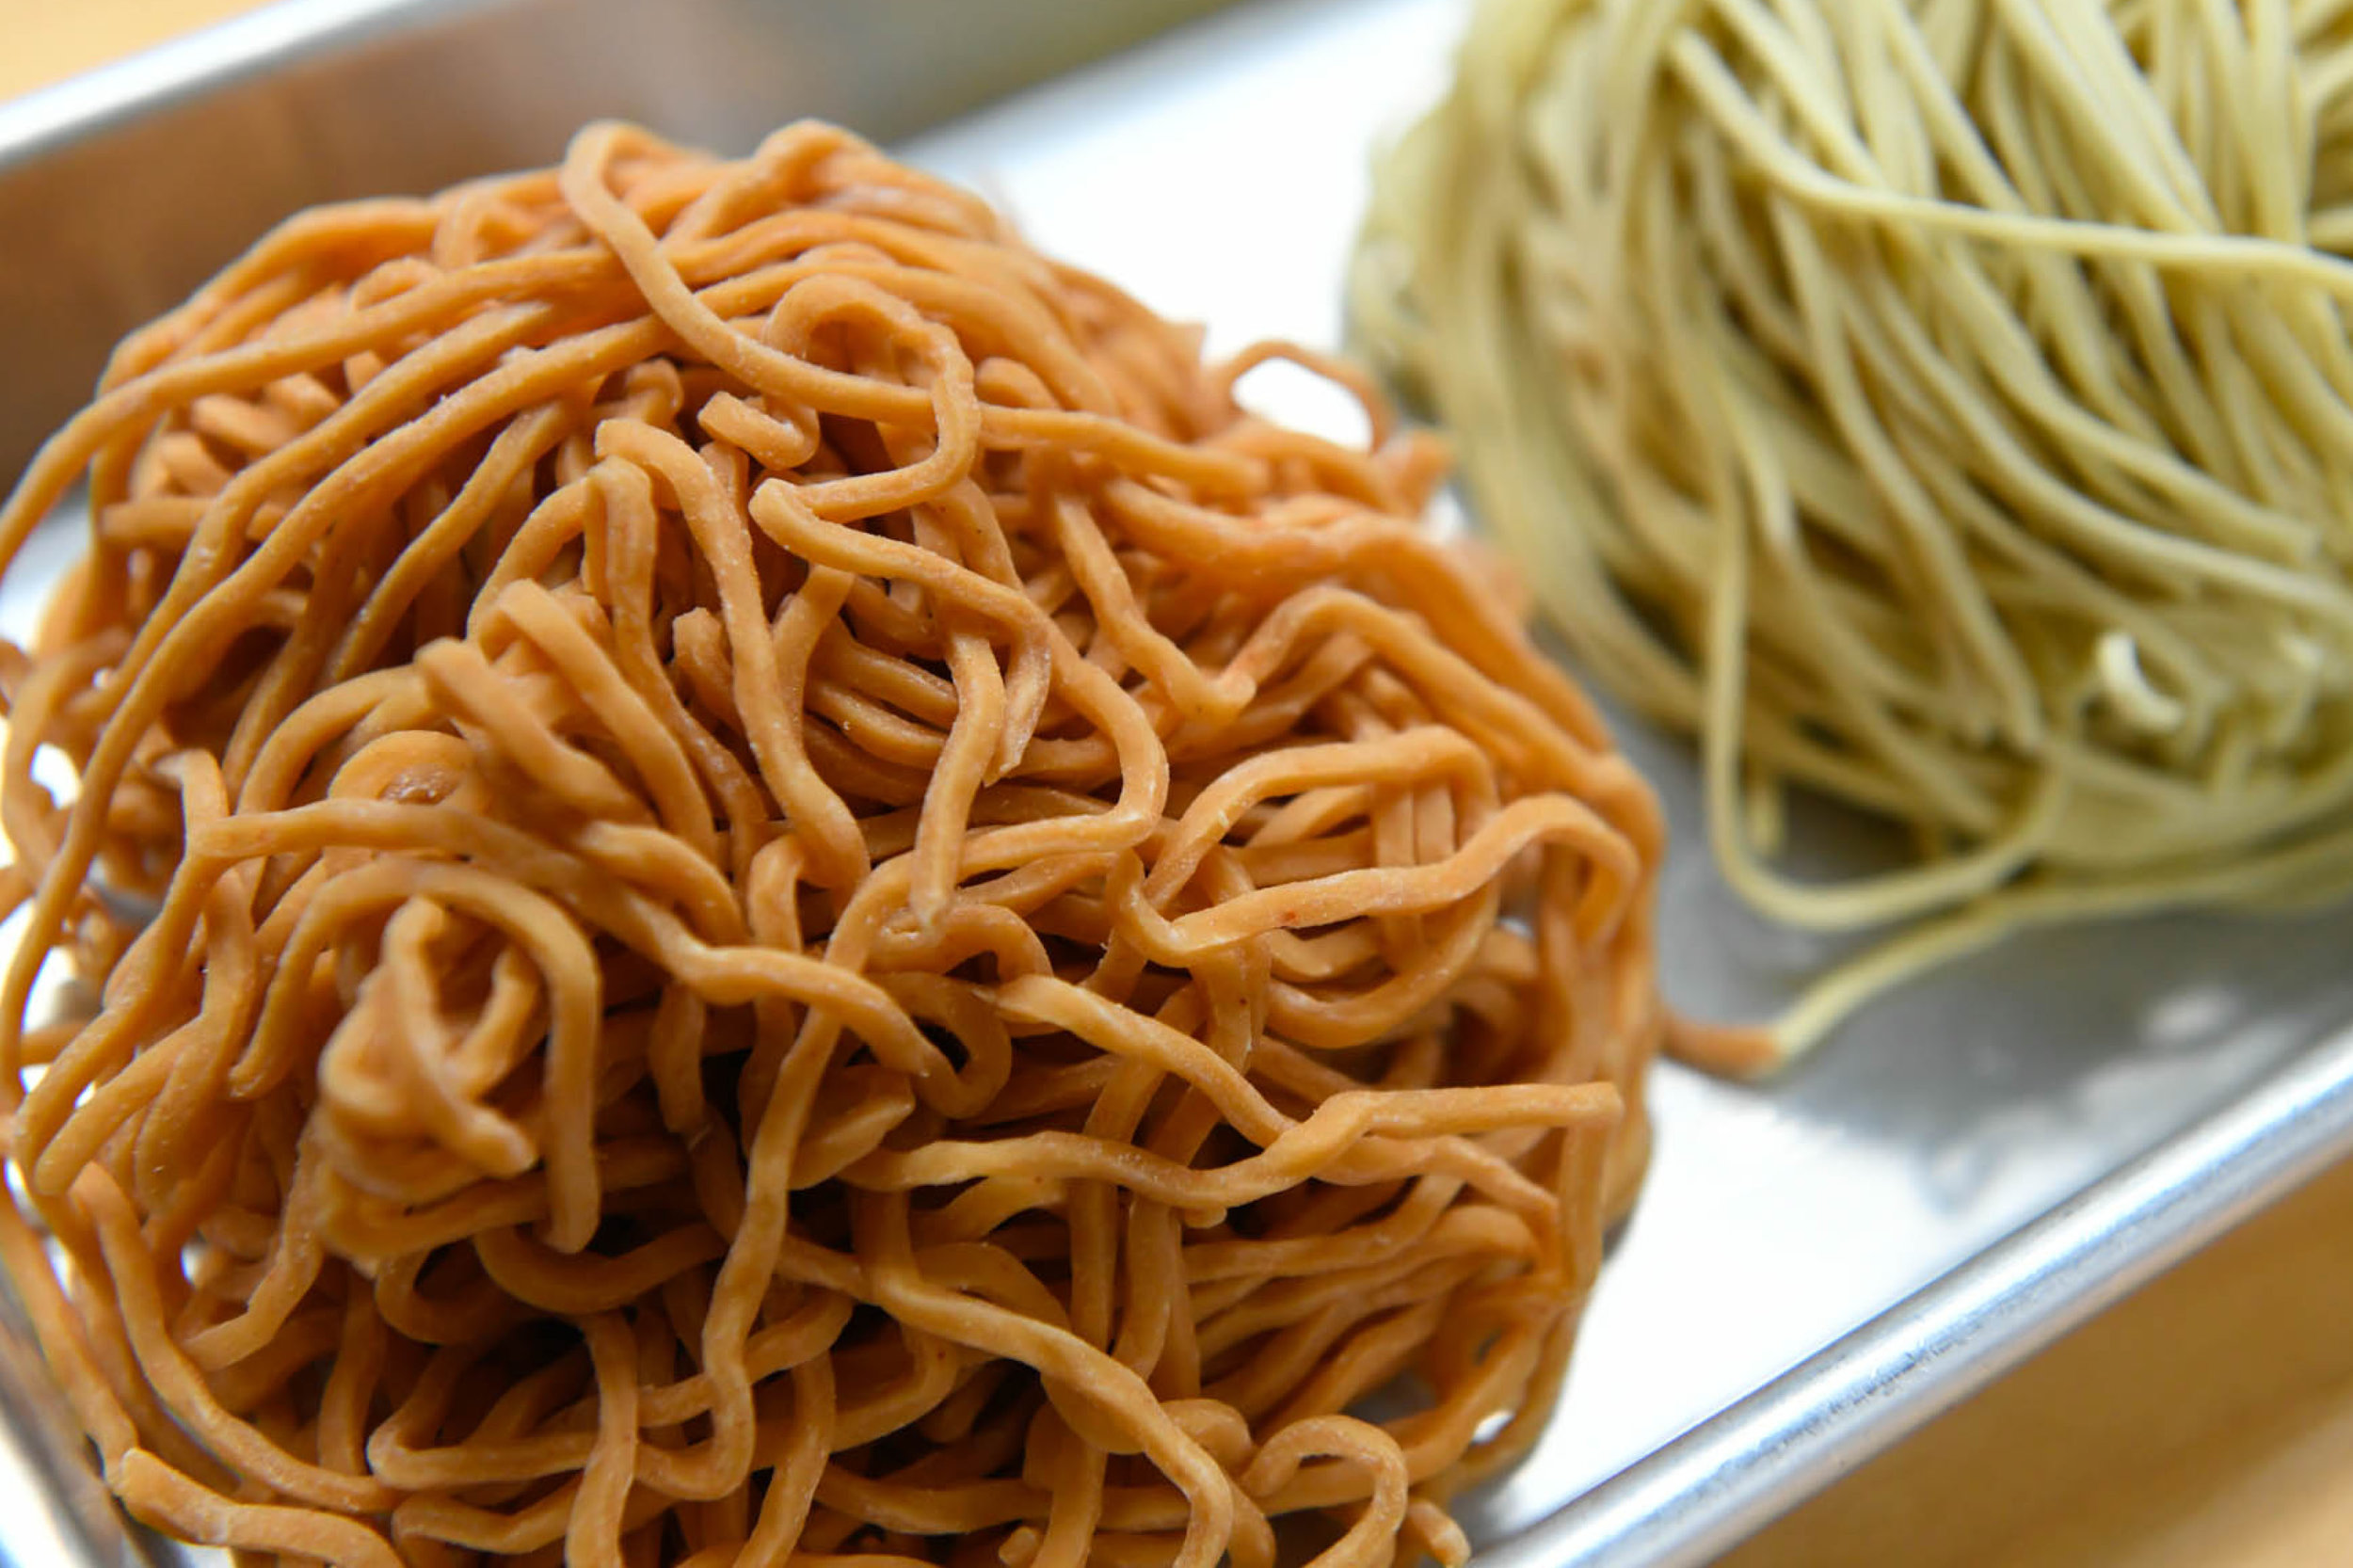   Noodle   We use special noodles for their unique texture and taste, mainly using the smooth thin flour noodles and thick wavy flour noodles. We’ve carefully selected the noodles based on their flavor profile, form, length, thickness, and texture fo